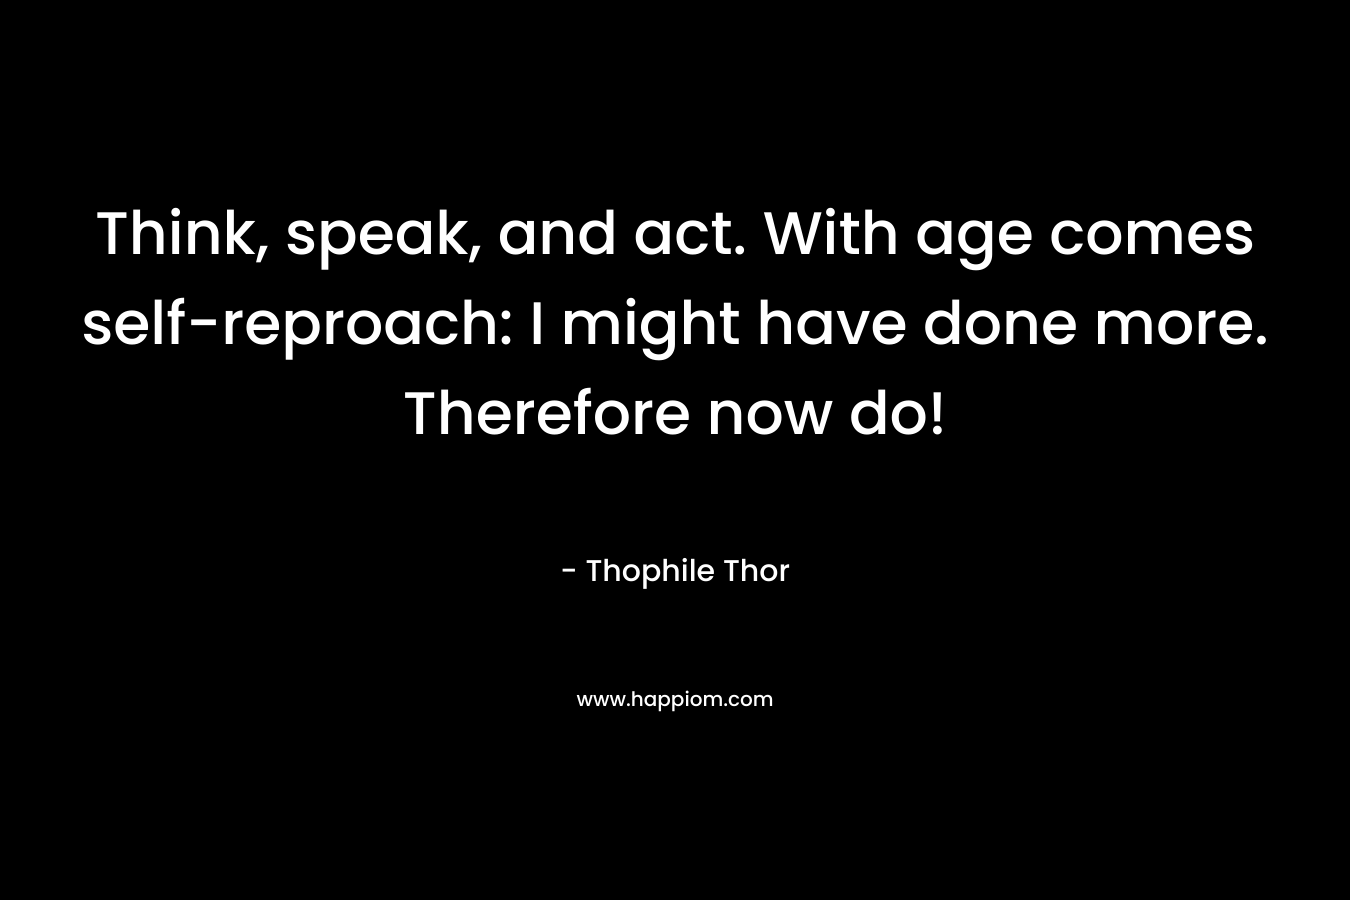 Think, speak, and act. With age comes self-reproach: I might have done more. Therefore now do!